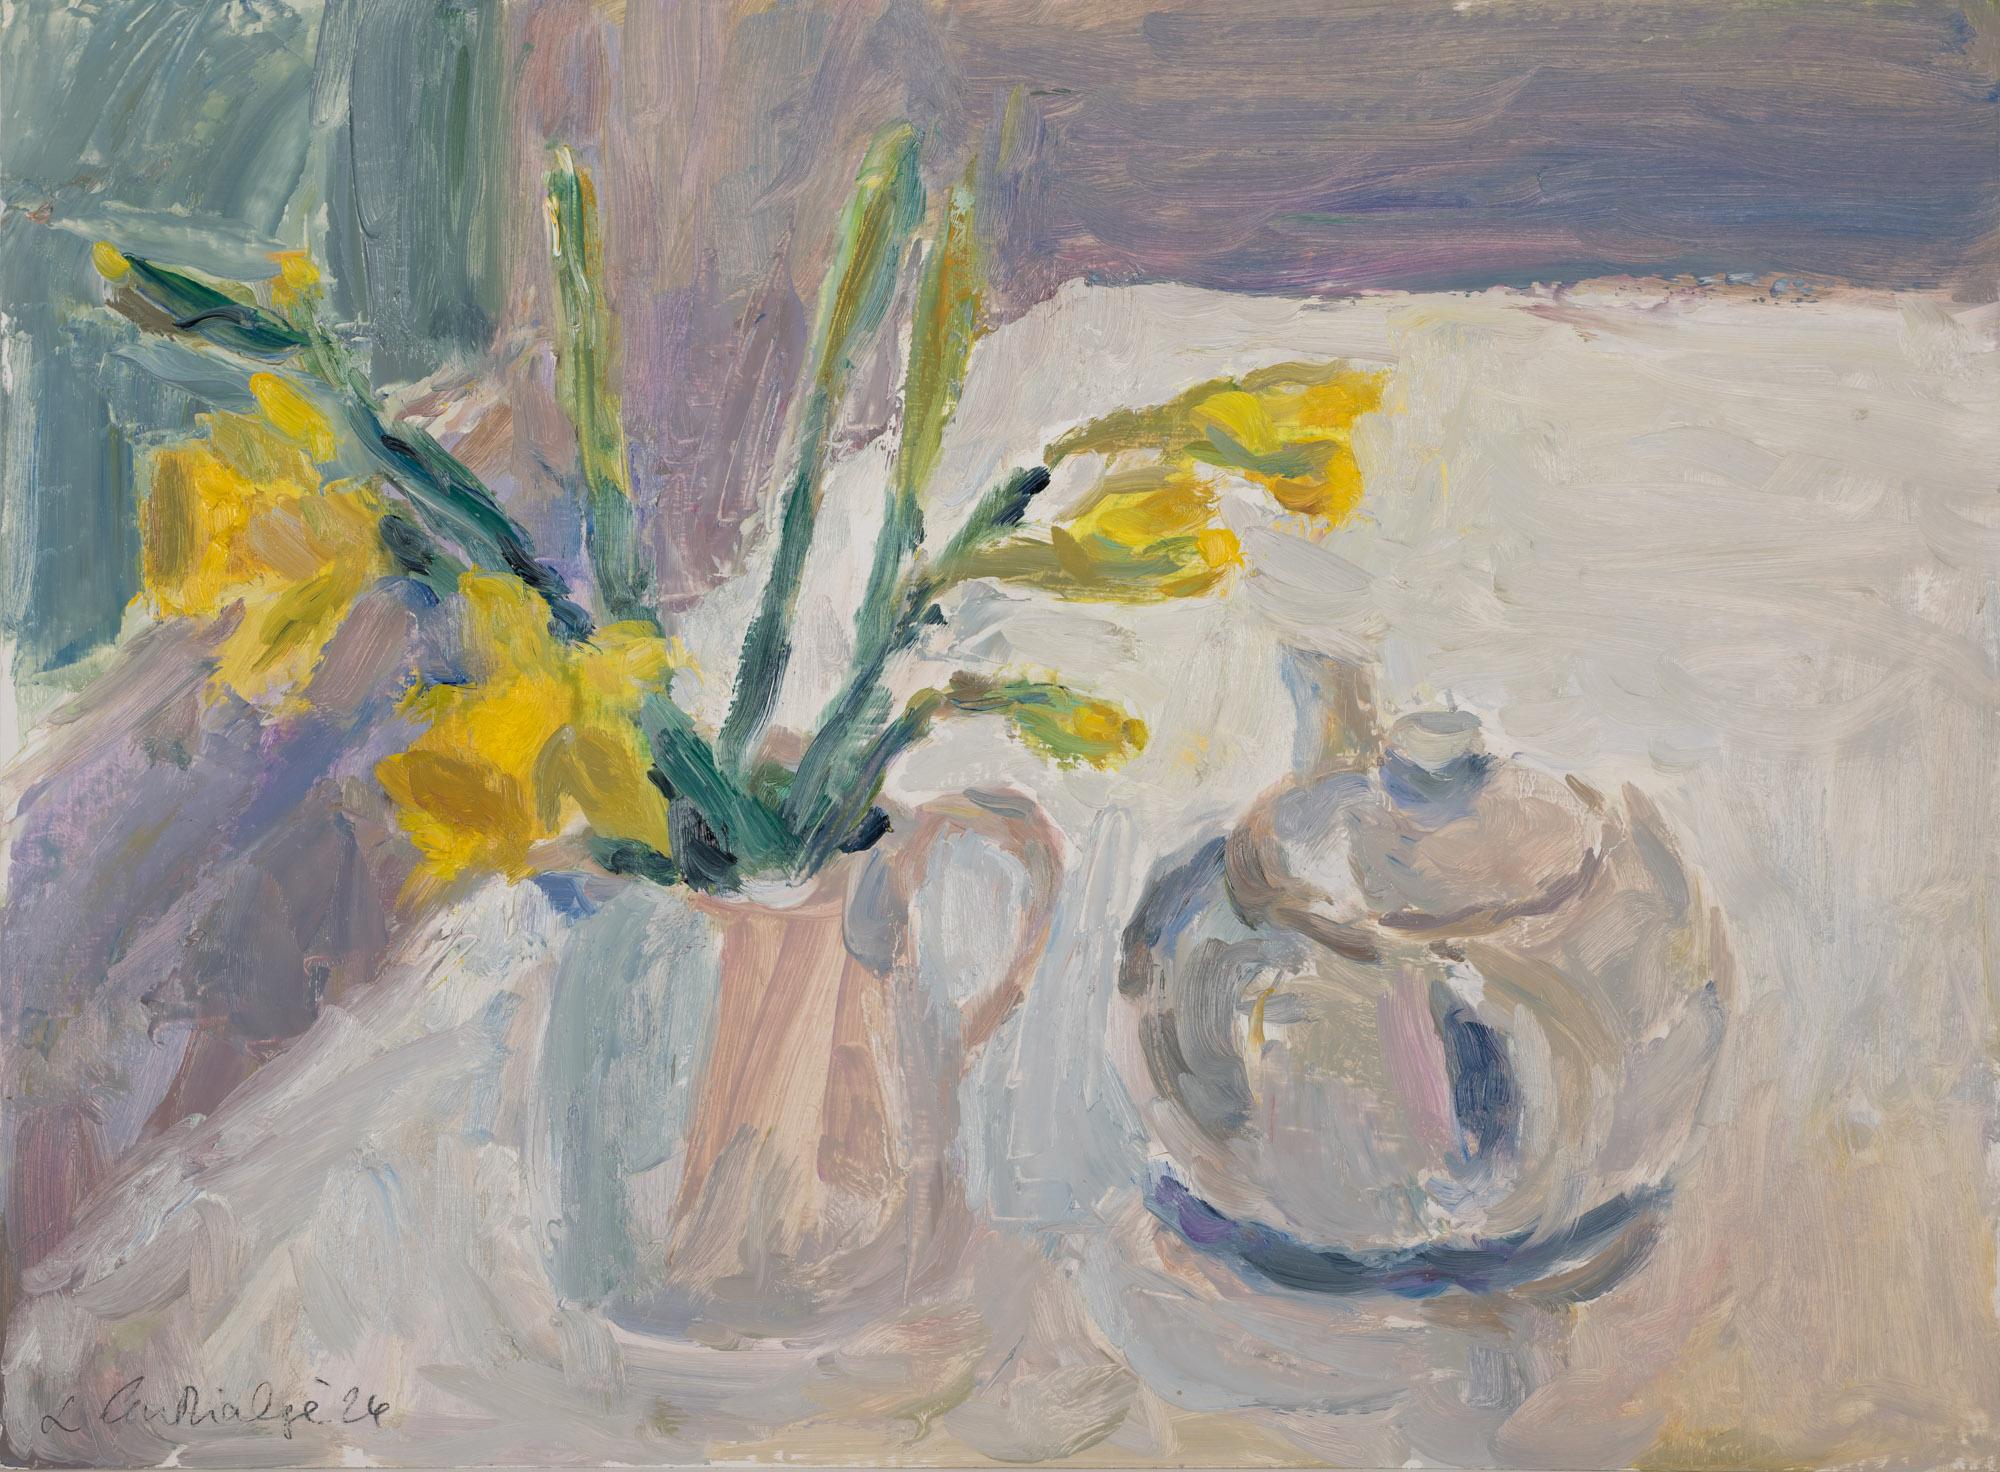 Teapot and Daffodils at Twilight